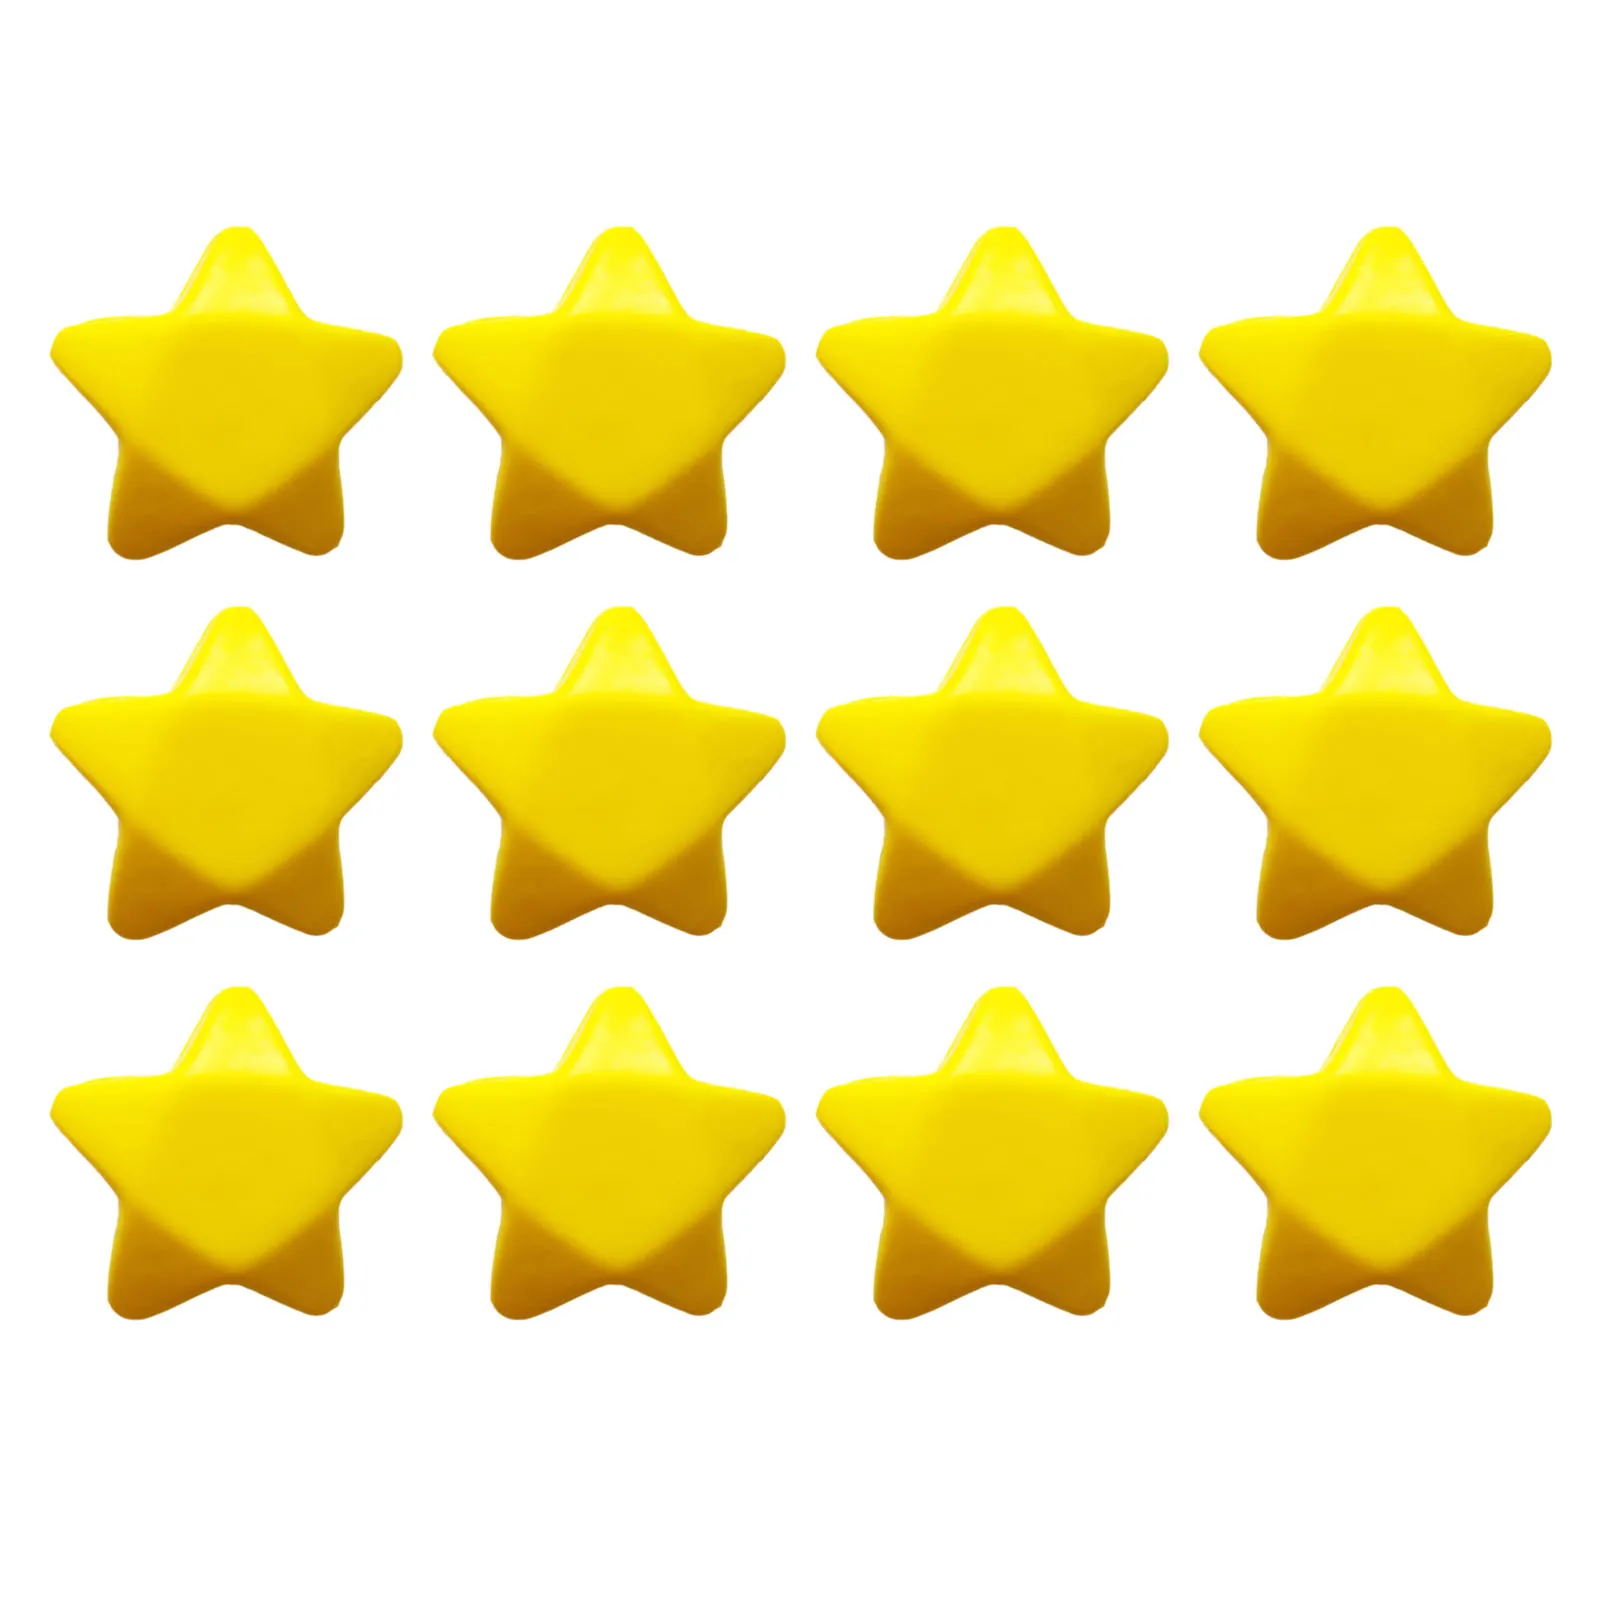 12PCS Five-pointed Star Stress Relief Balls Mini Soft Foam Stress Toys Gift For Kids Decompression Toy Set enlarge